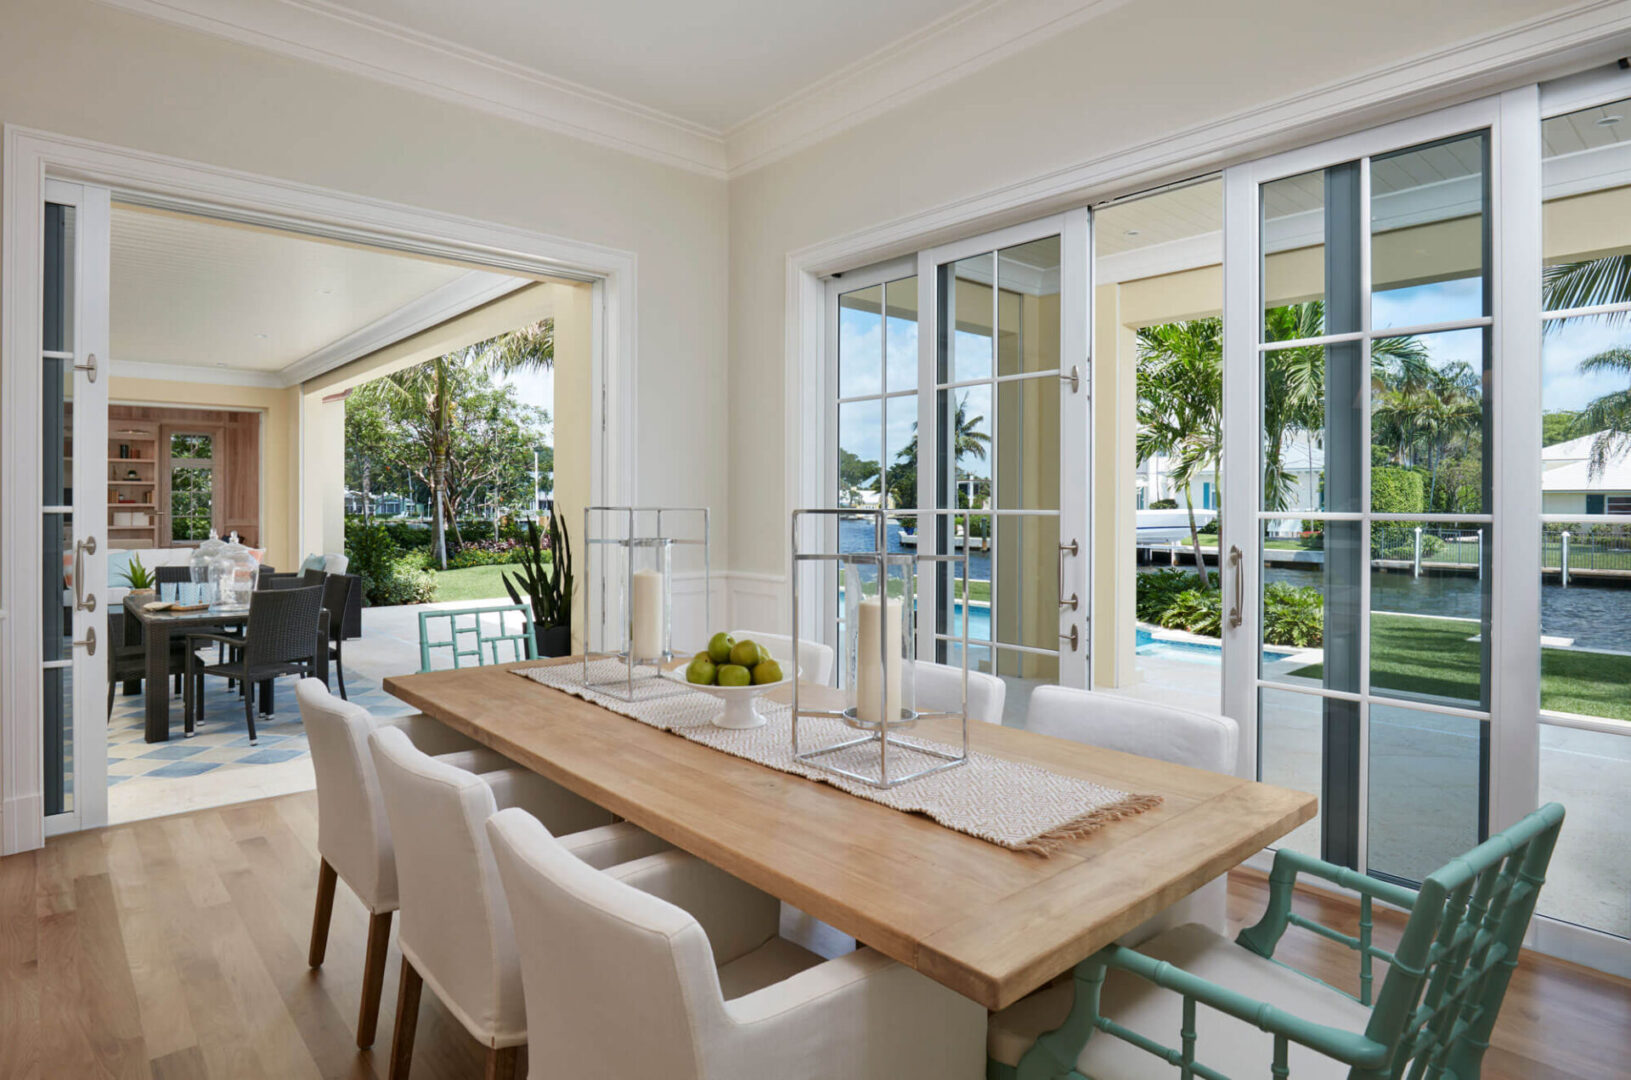 A dining room table with white chairs and a pool in the background.